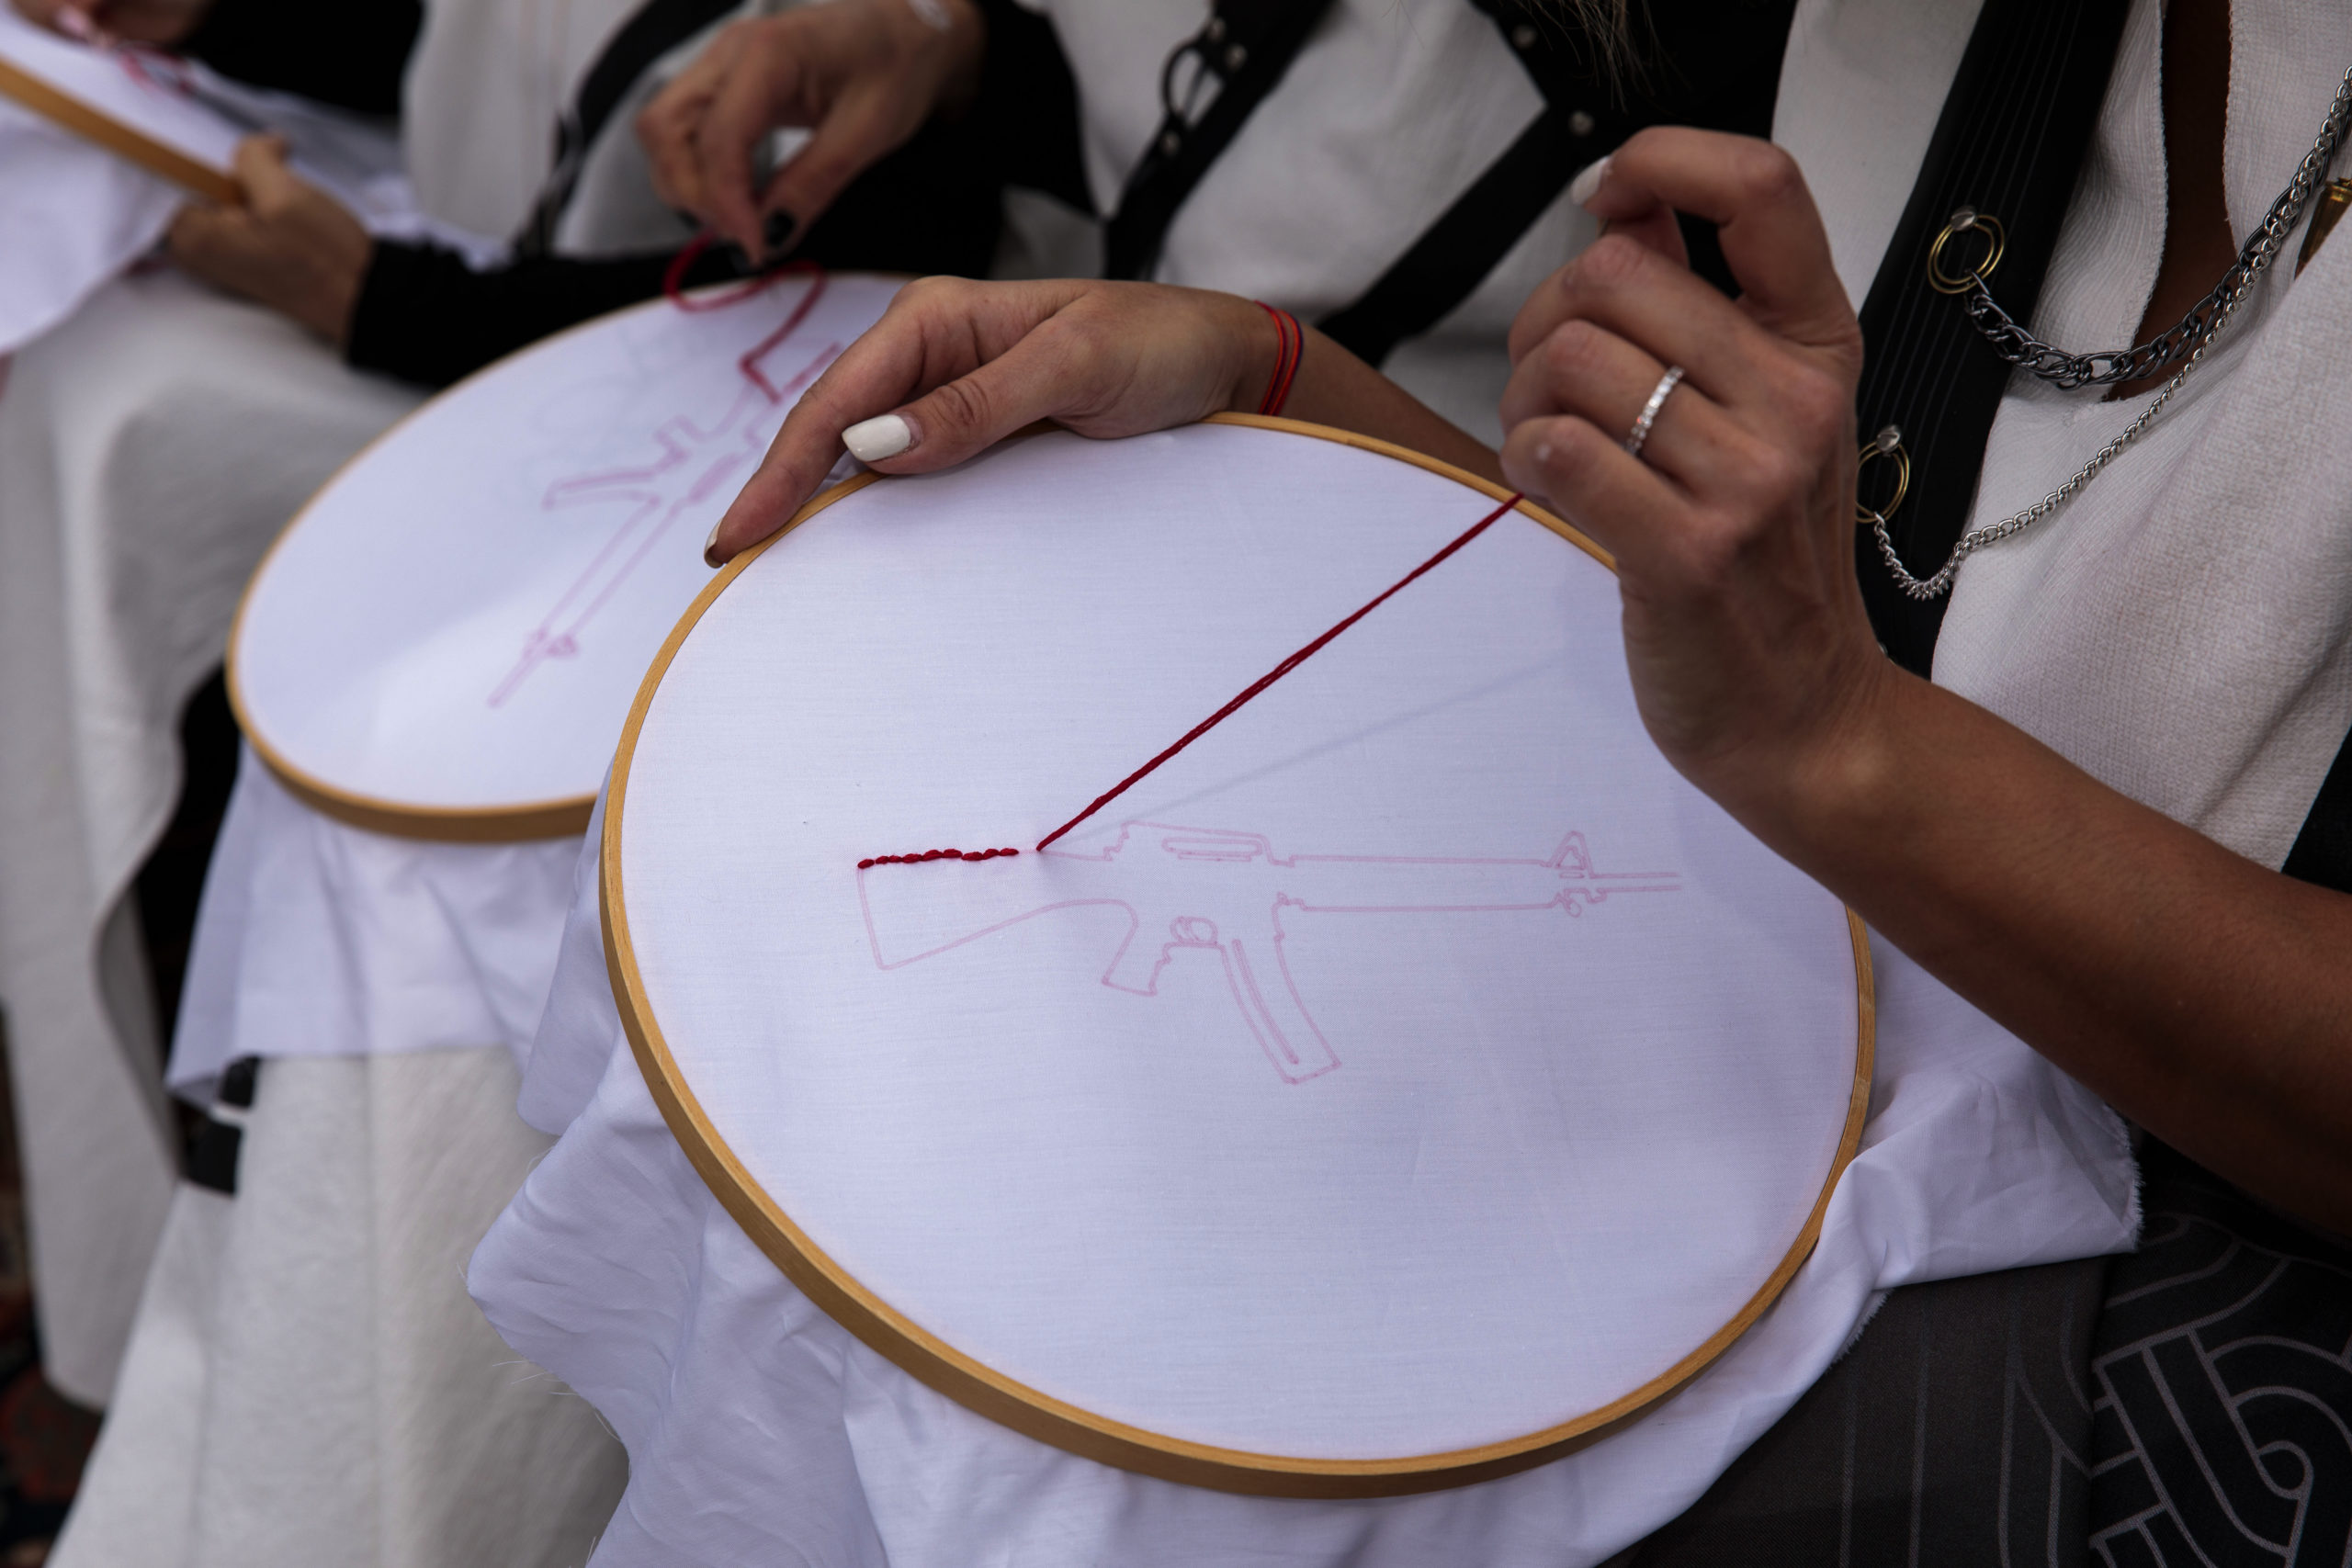 A person's hands doing embroidery of a gun.